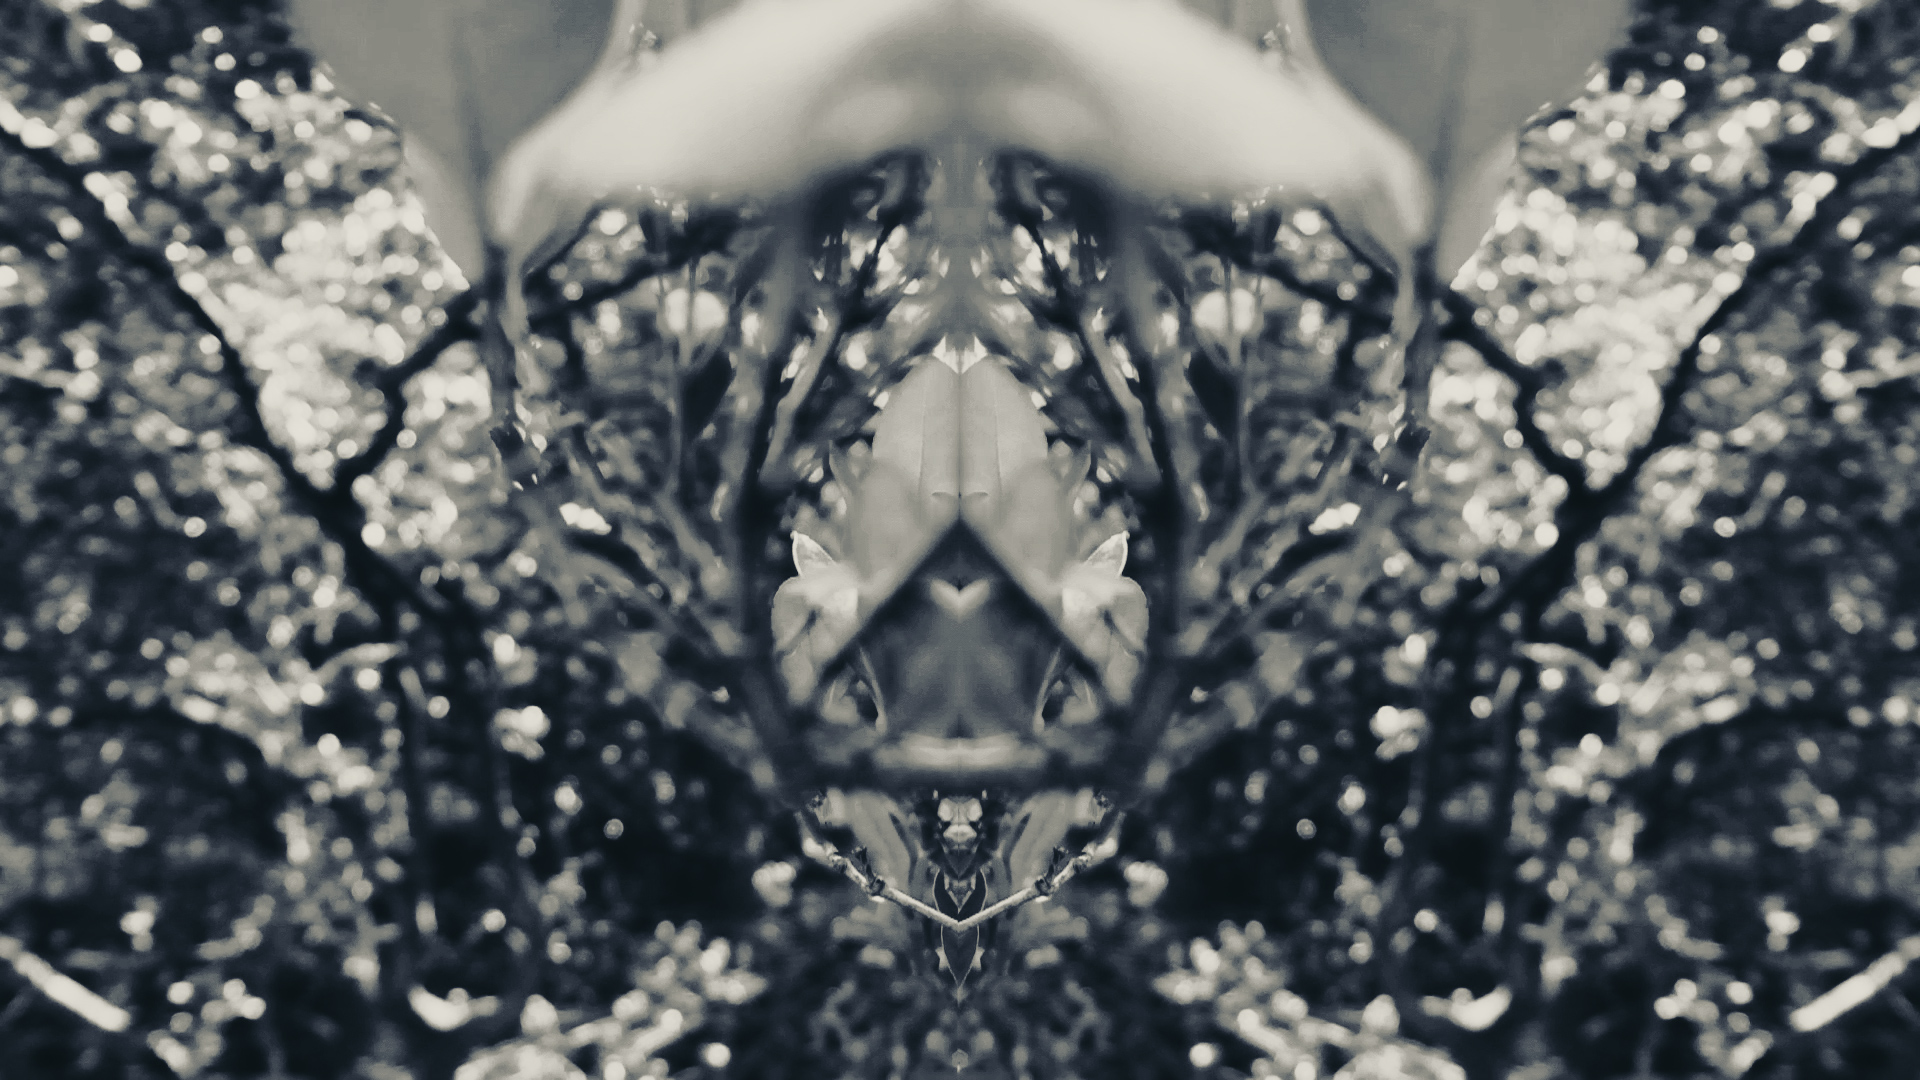 A black and white picture of mangroves mirrored to create a kaleidoscopic effect